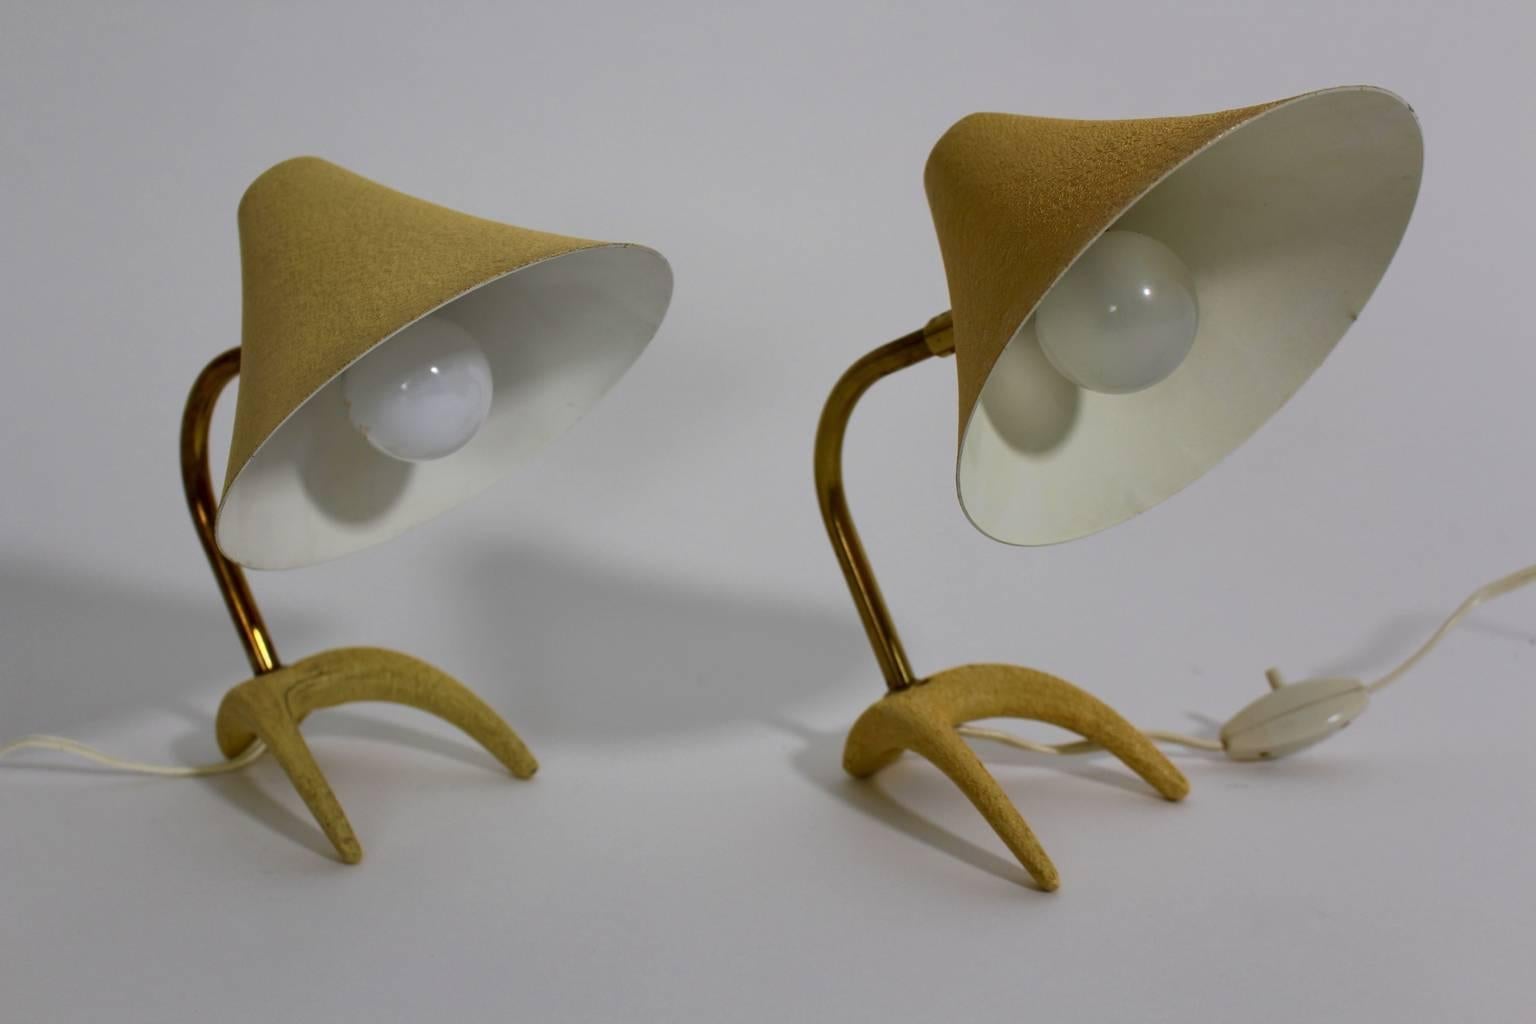 Mid-Century Modern vintage table lamps or nightstand lamps in the color soft yellow by Louis Kalff for Philips, 1950s.
A stunning pair of table lamps or nightstand lamps in the flattering color tone soft yellow.
The table lamps feature cast iron